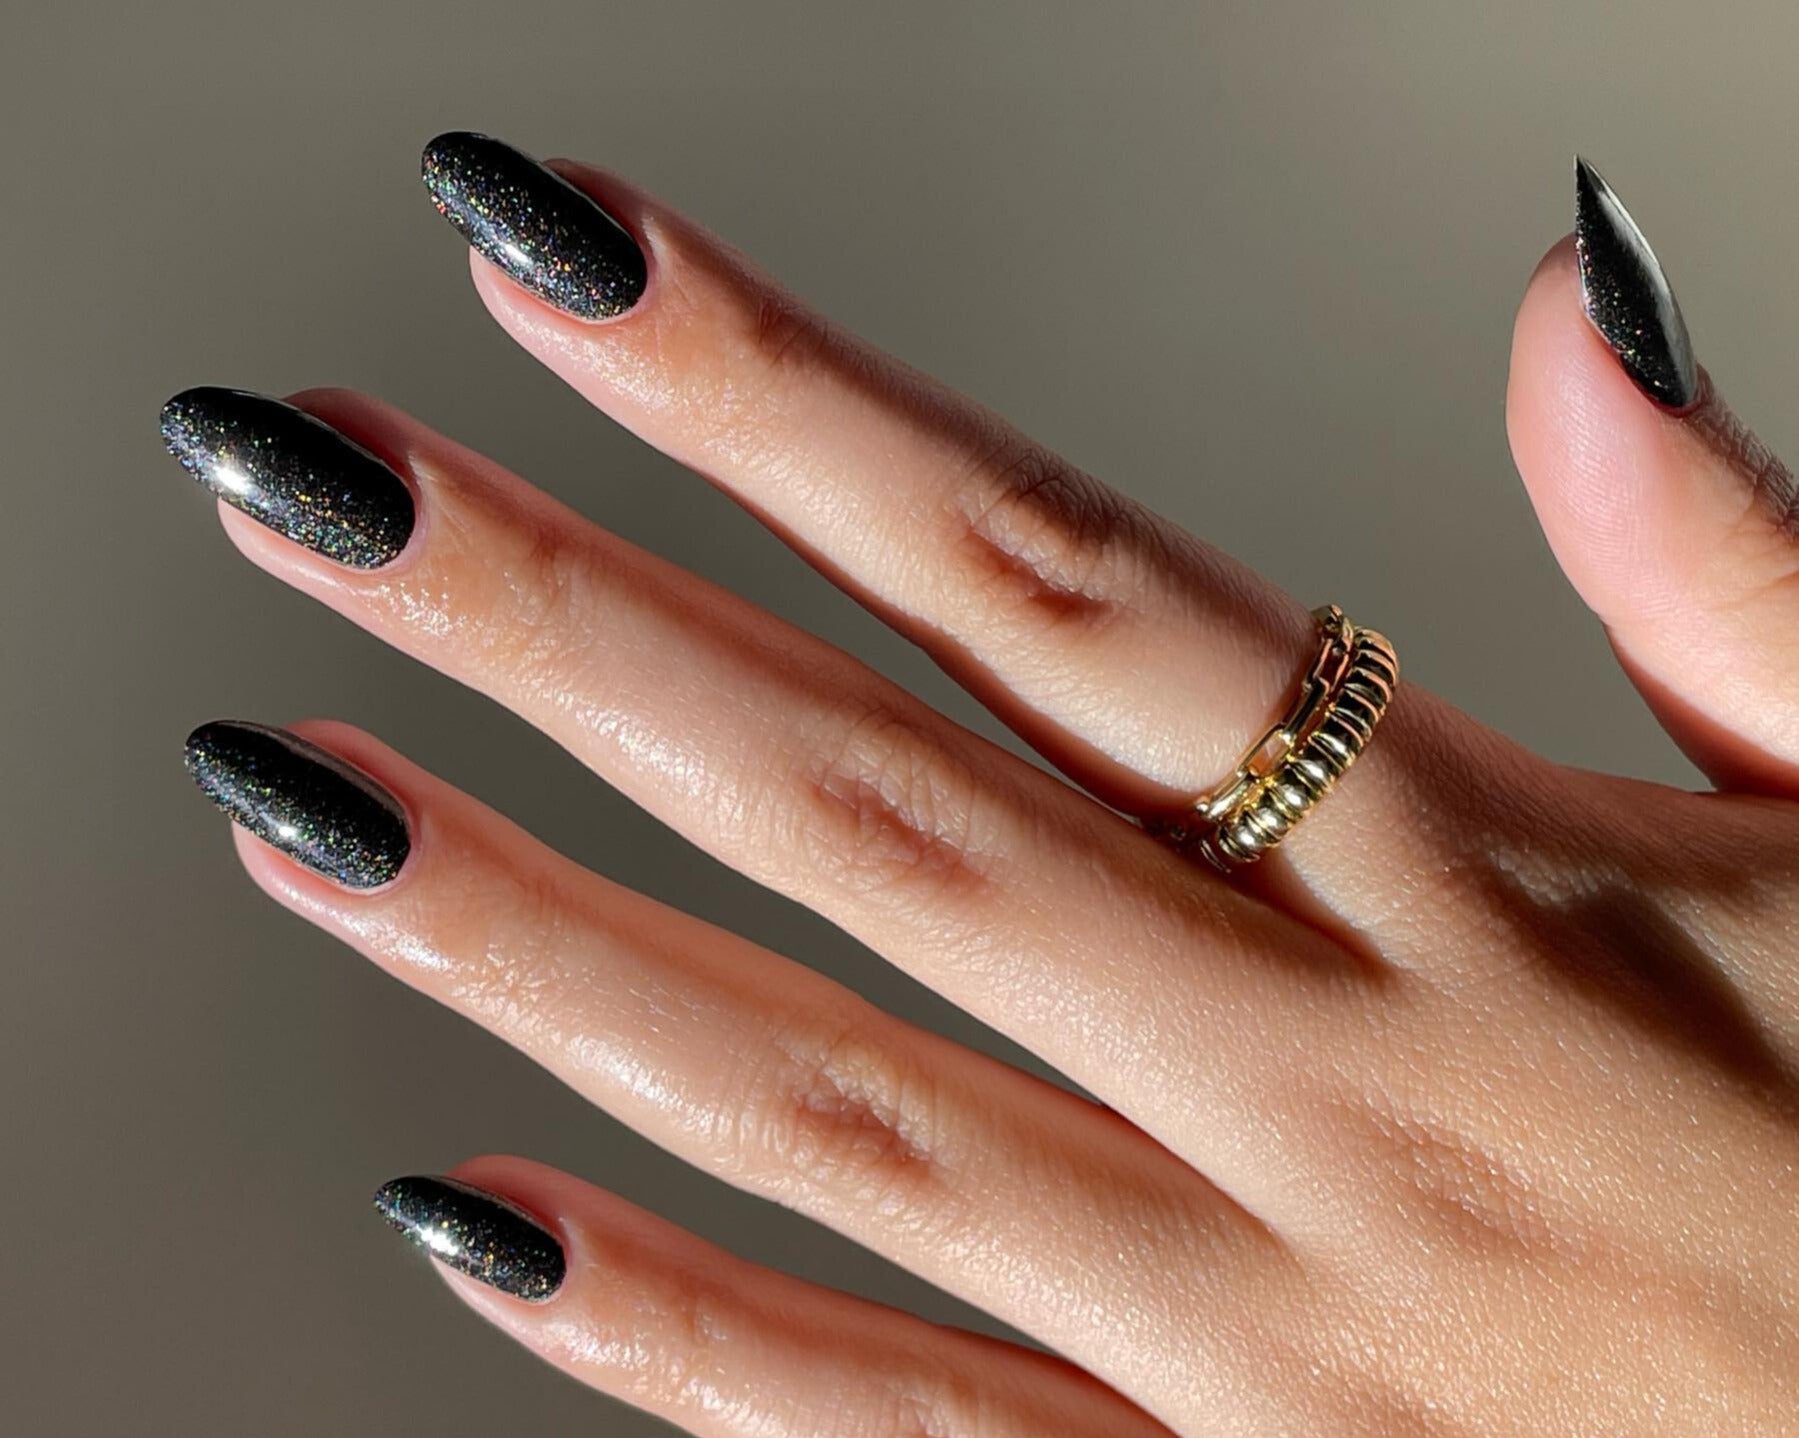 Black is the most popular nail polish shade globally, finds new report -  Premium Beauty News